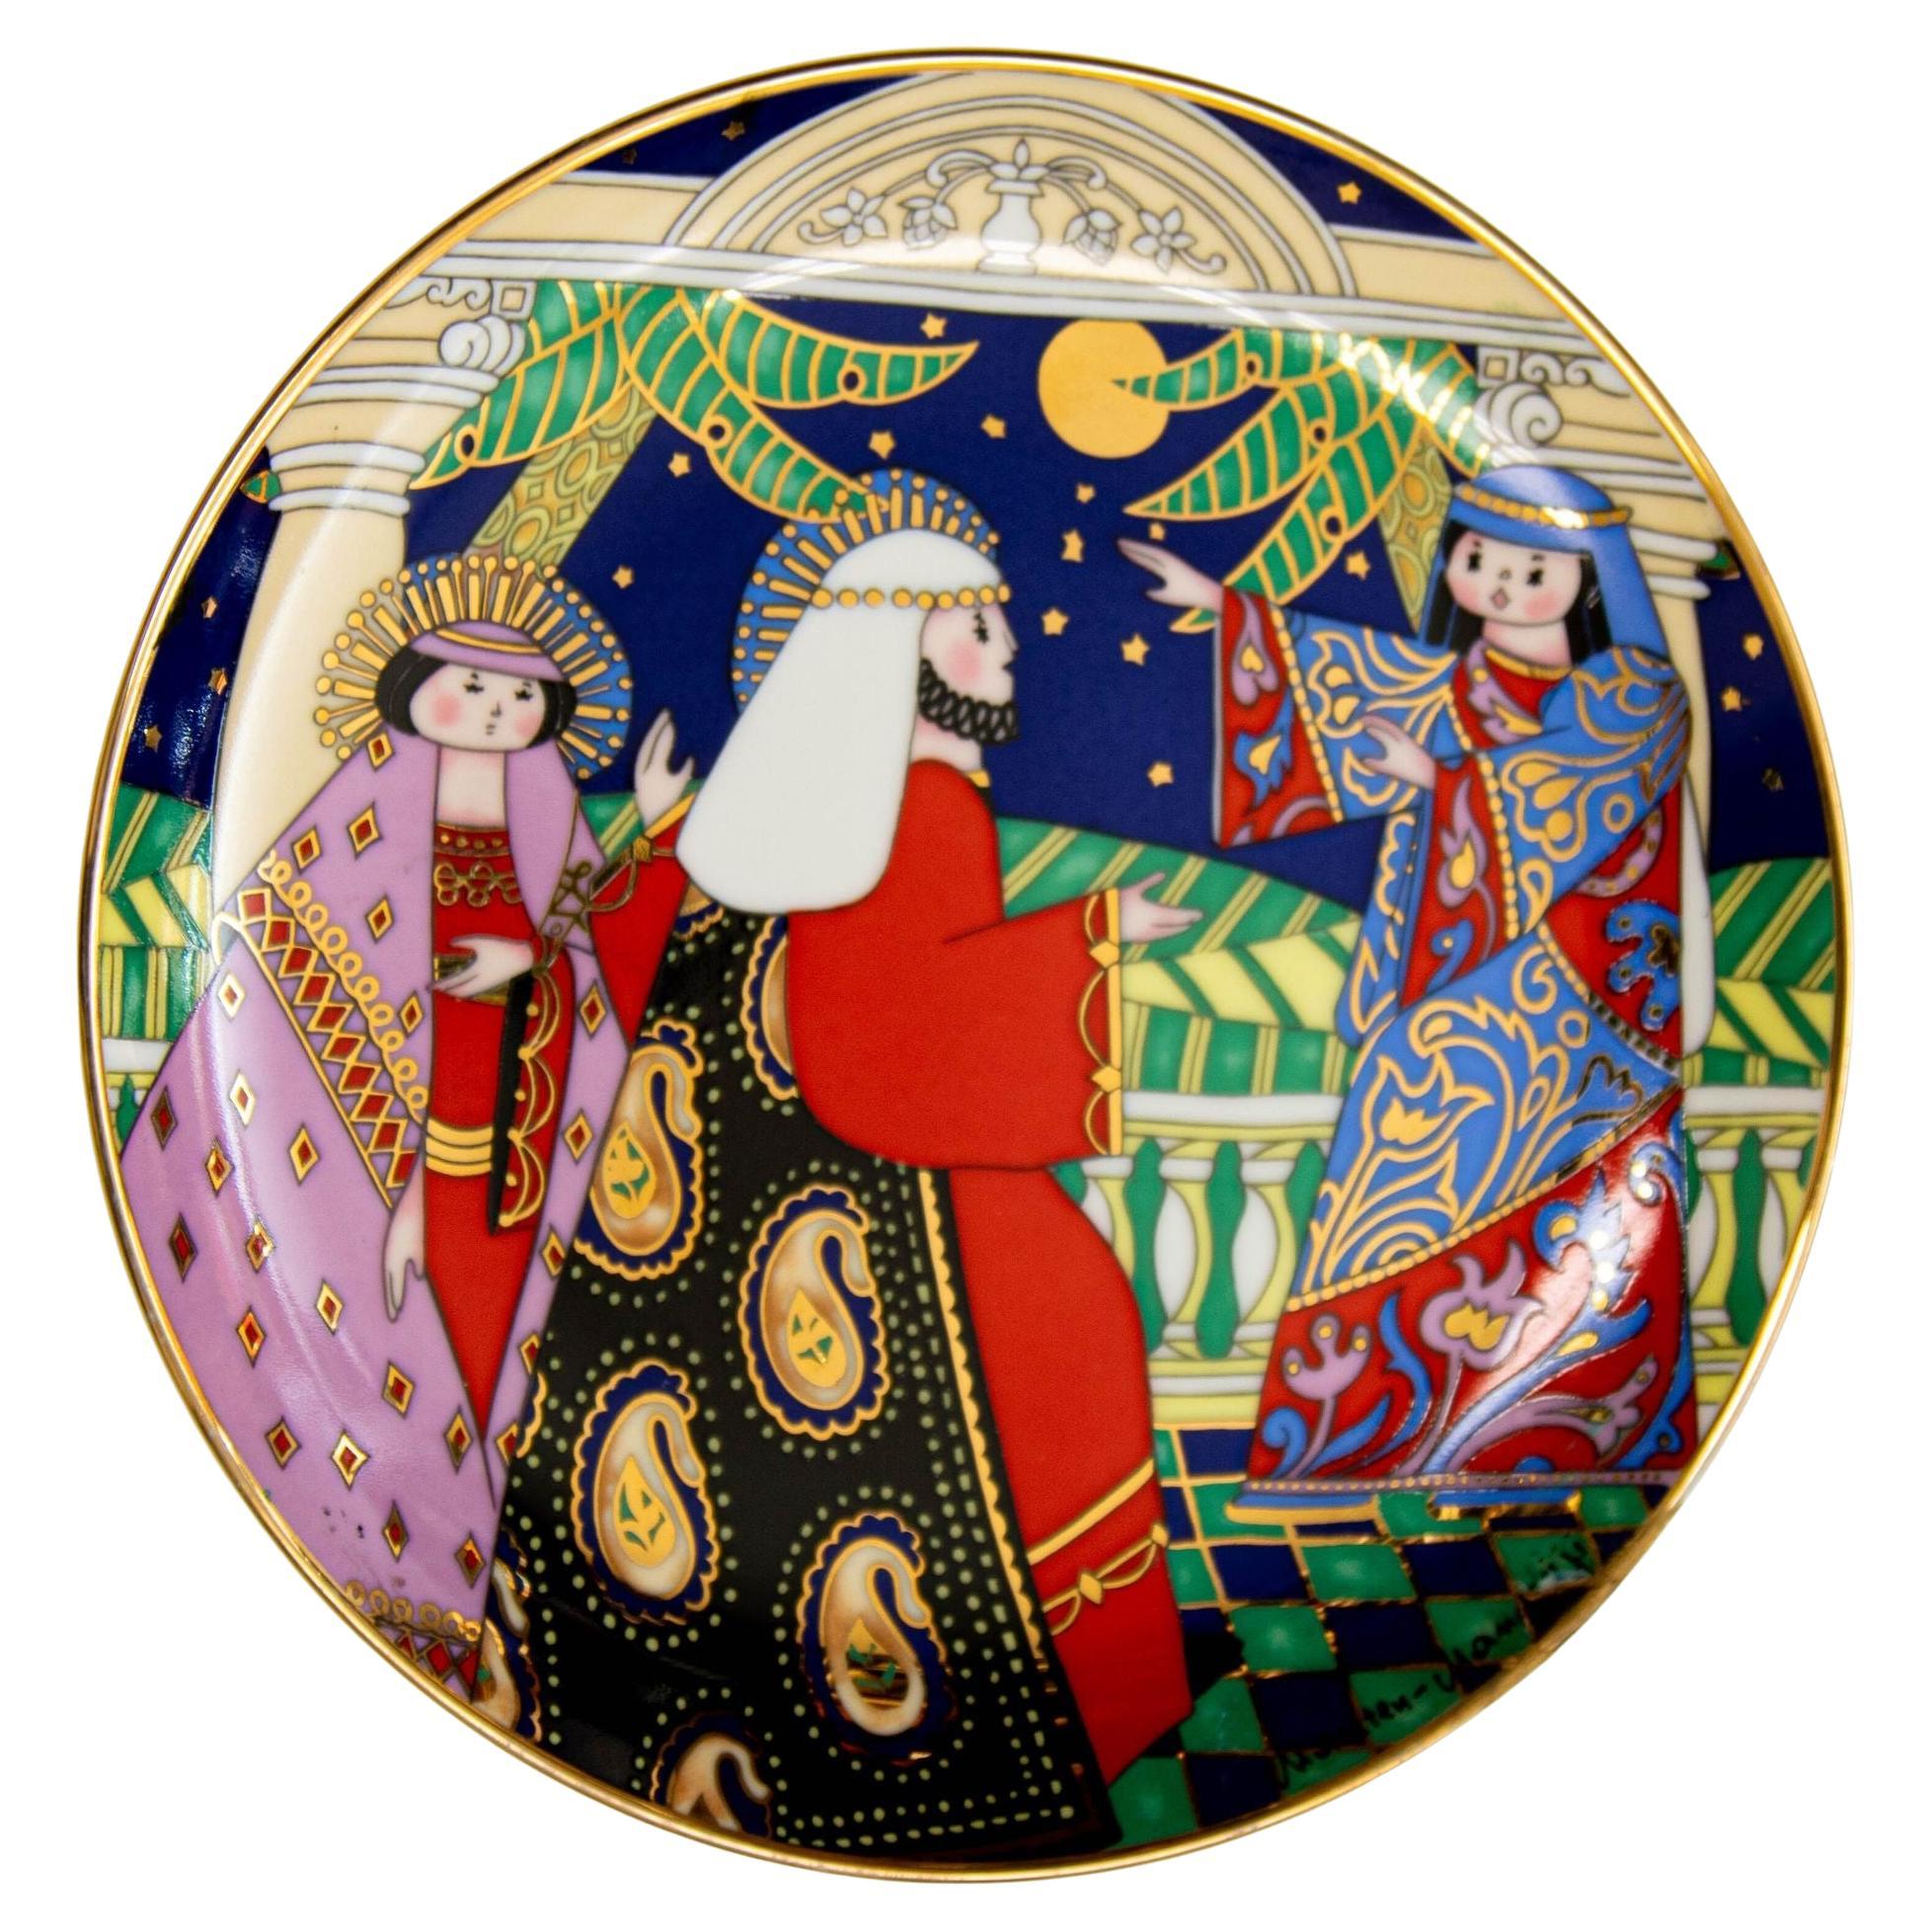 House of Faberge Collector Plate "No Room At The Inn" 1991